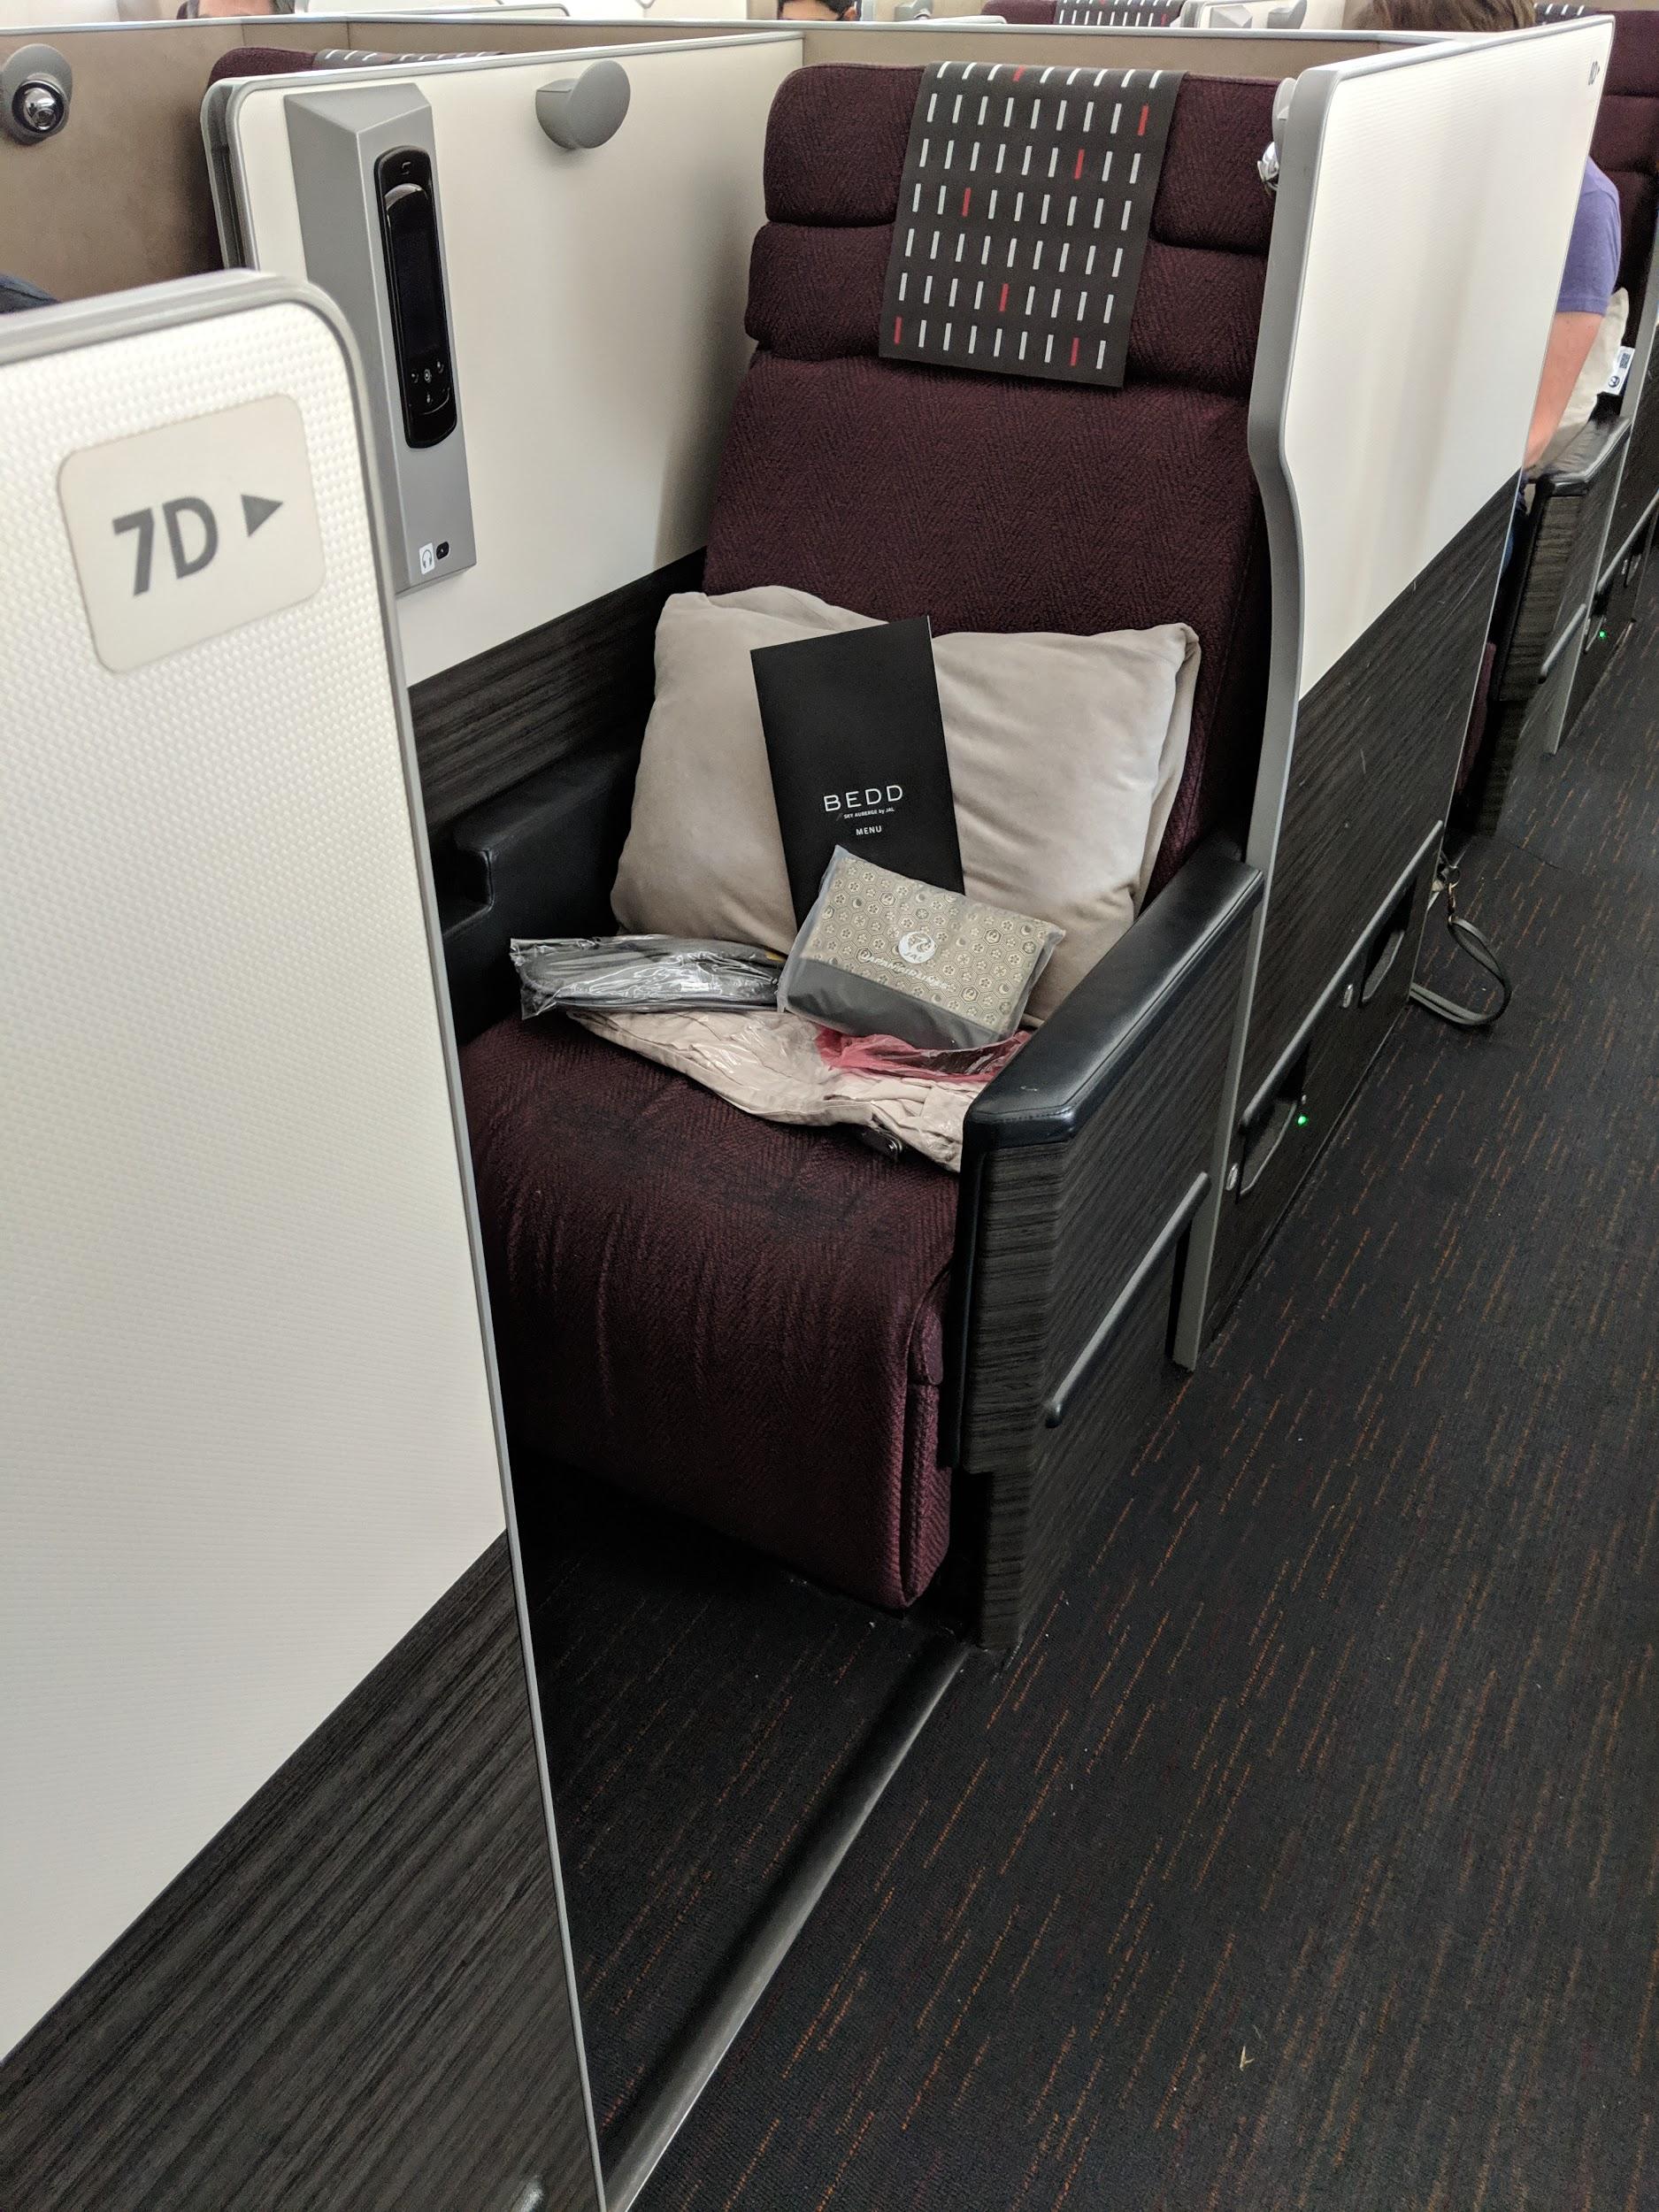 JAL Boeing 787 Business Class seat